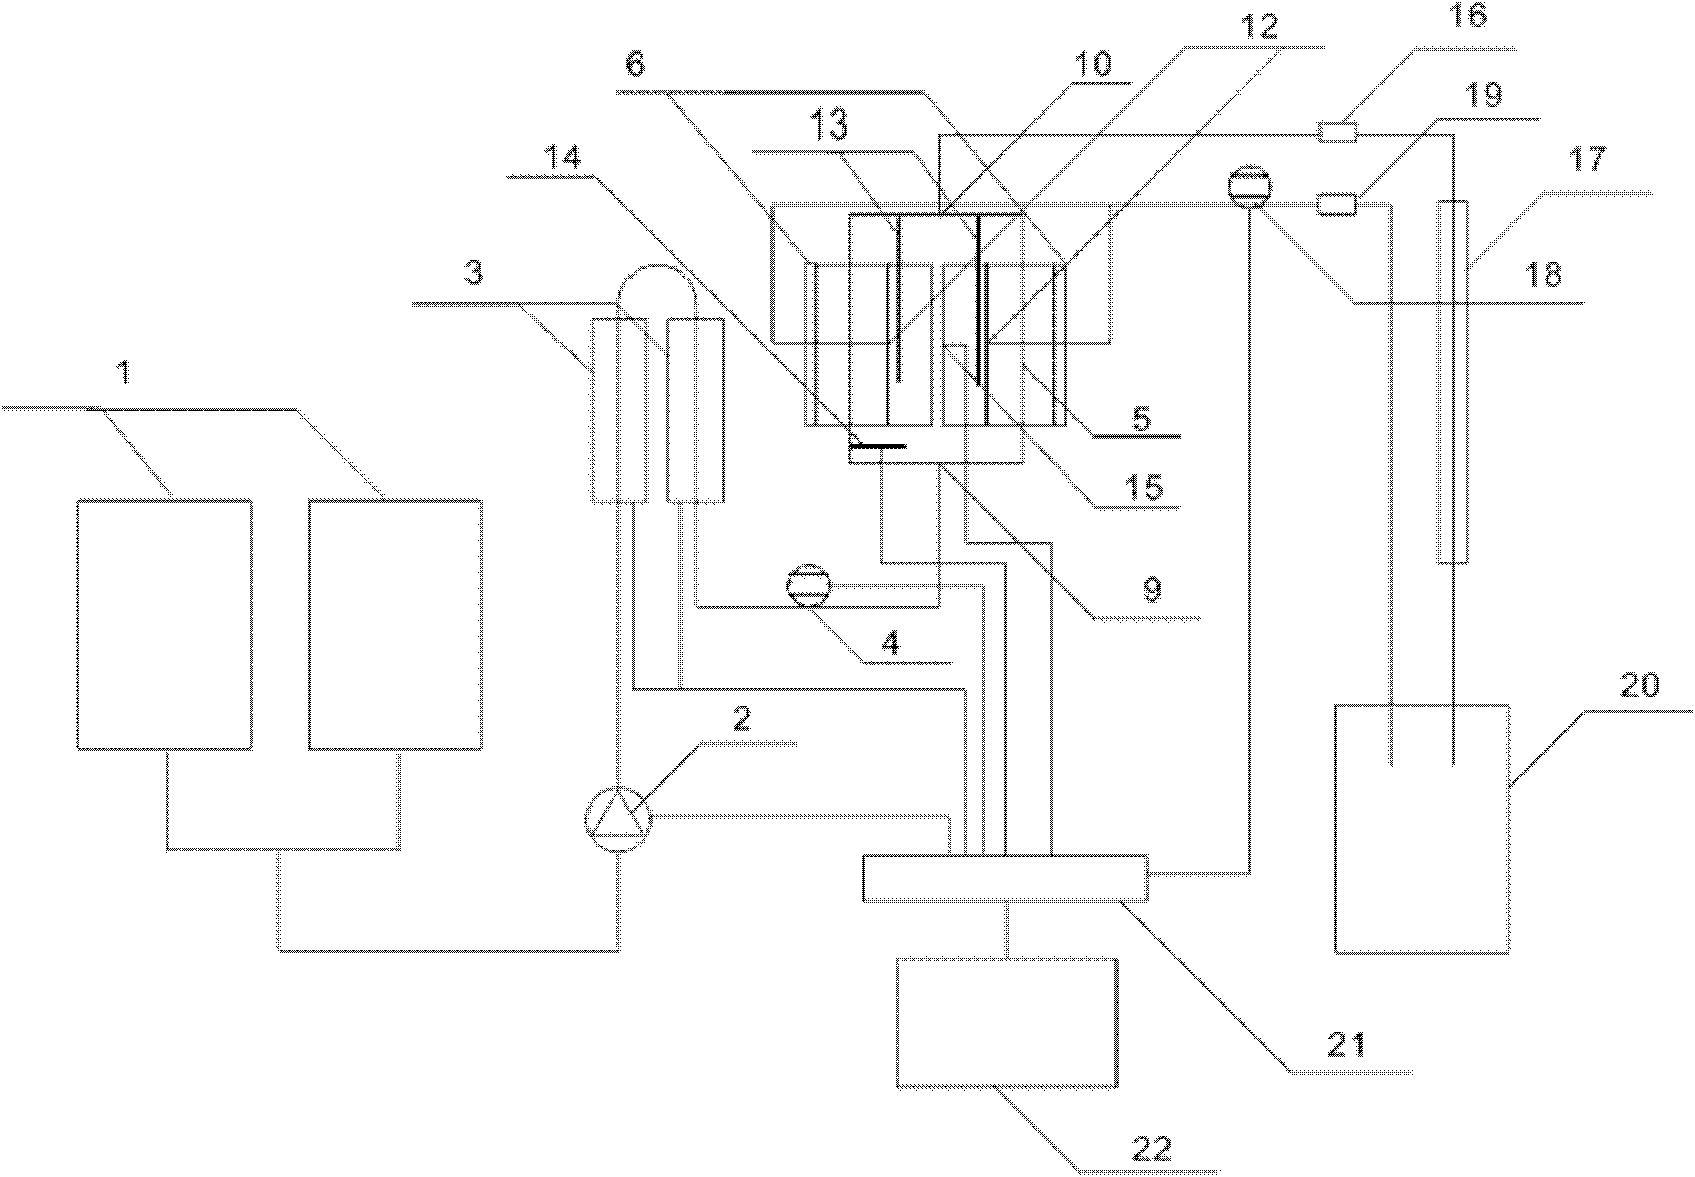 Test device and method for simulating acid etching crack flow guide capability